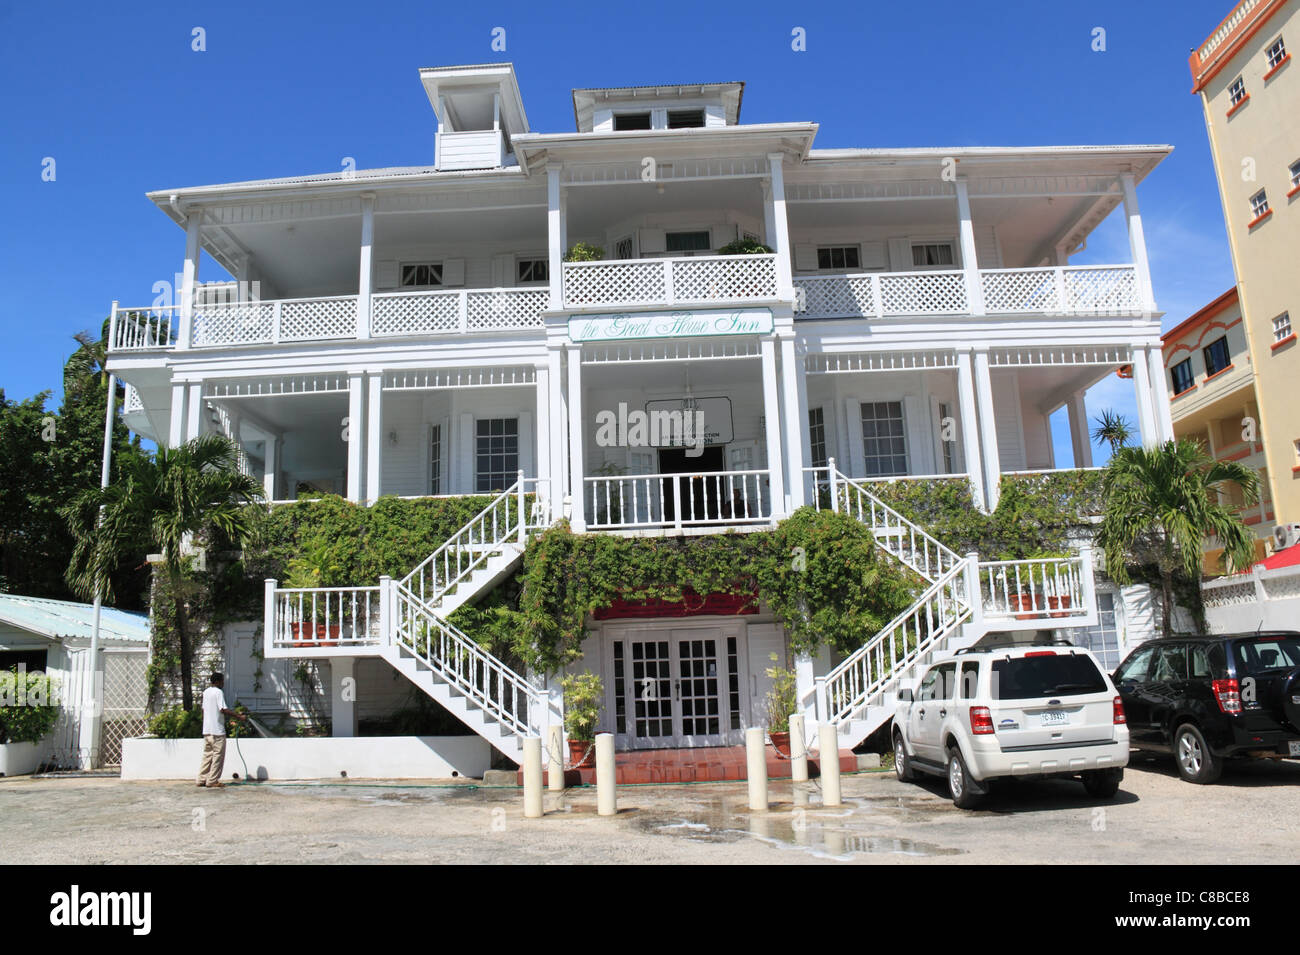 The Great House hotel, dating from 1927, Cork Street, Fort George, Belize City, Belize, Caribbean, Central America Stock Photo